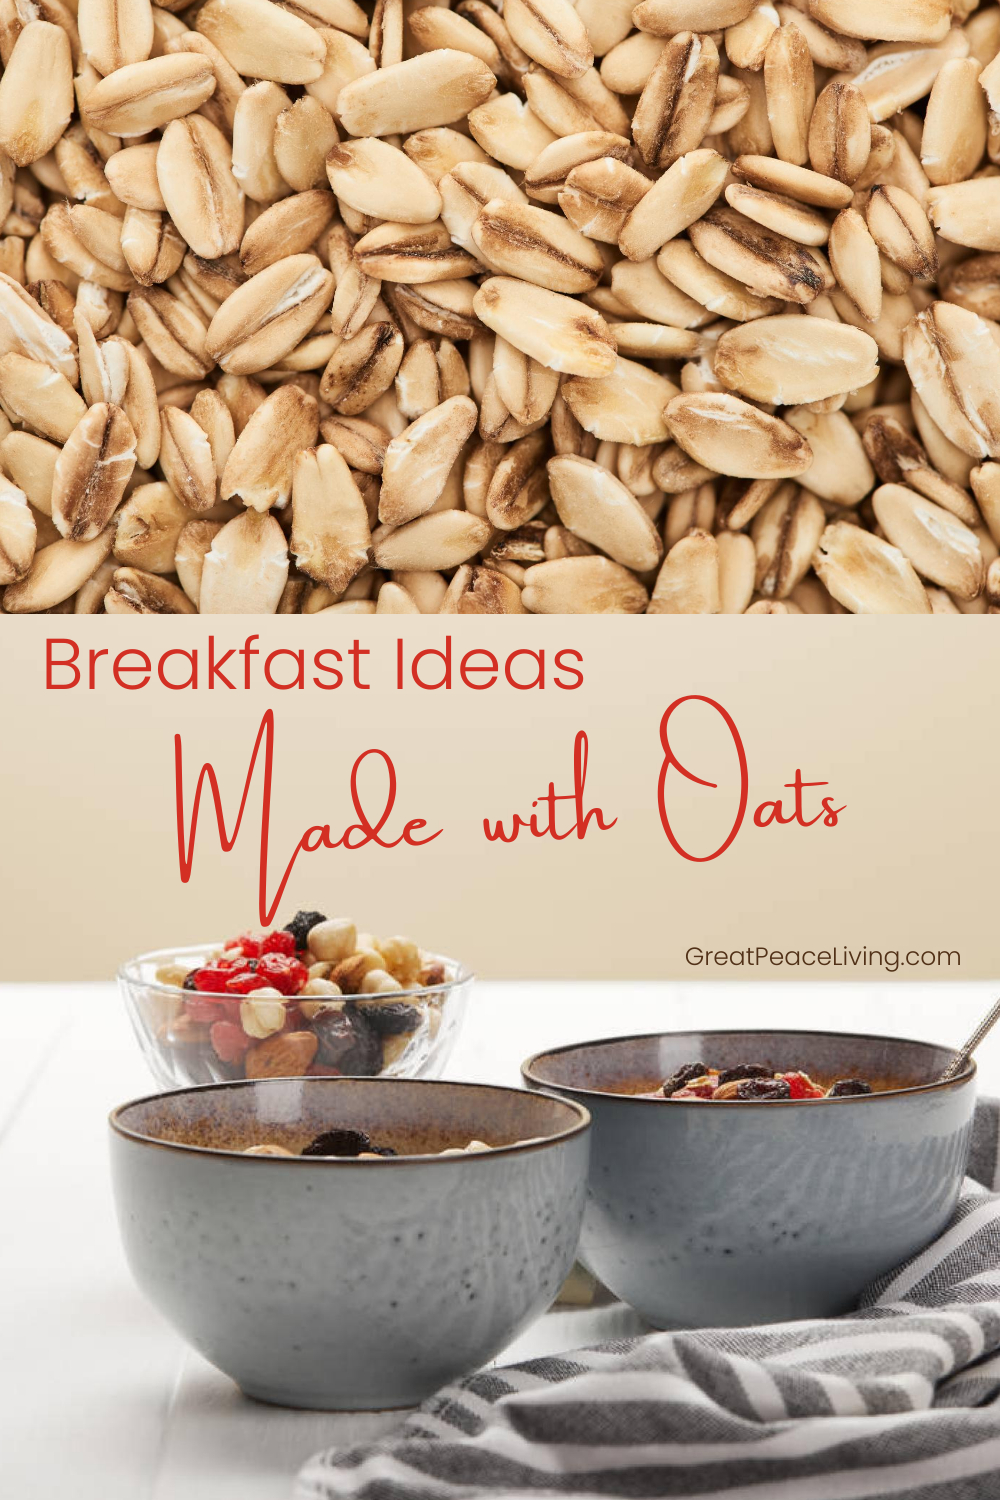 Breakfast Ideas Made with Oats